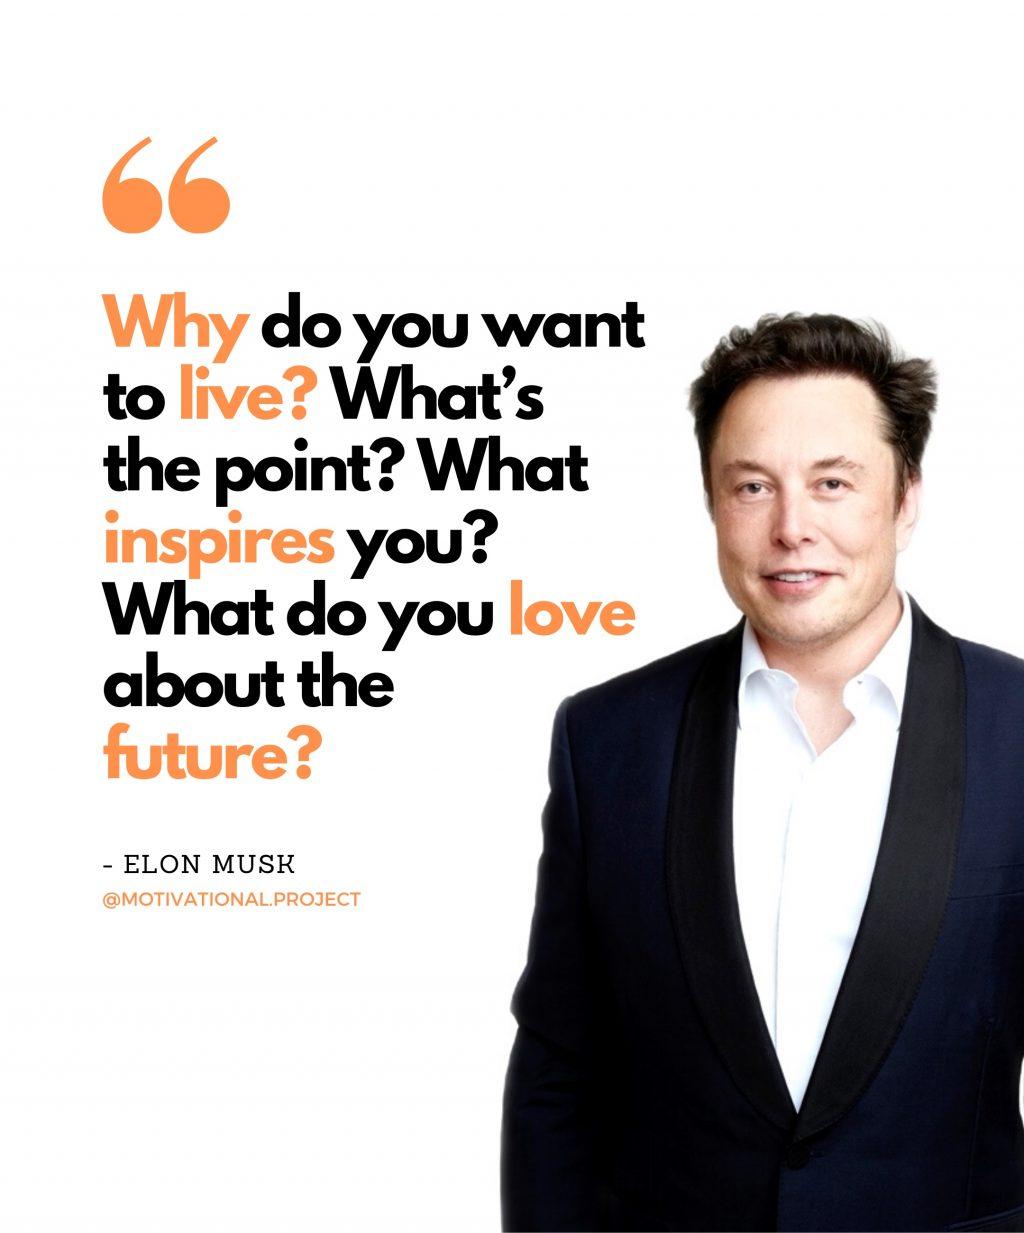 The Instagram account for the project, @motivational.project, frequently posts quotes from successful people as a mode of inspiration. Entrepreneur Elon Musk is featured above. Photo courtesy of Julia Strouk